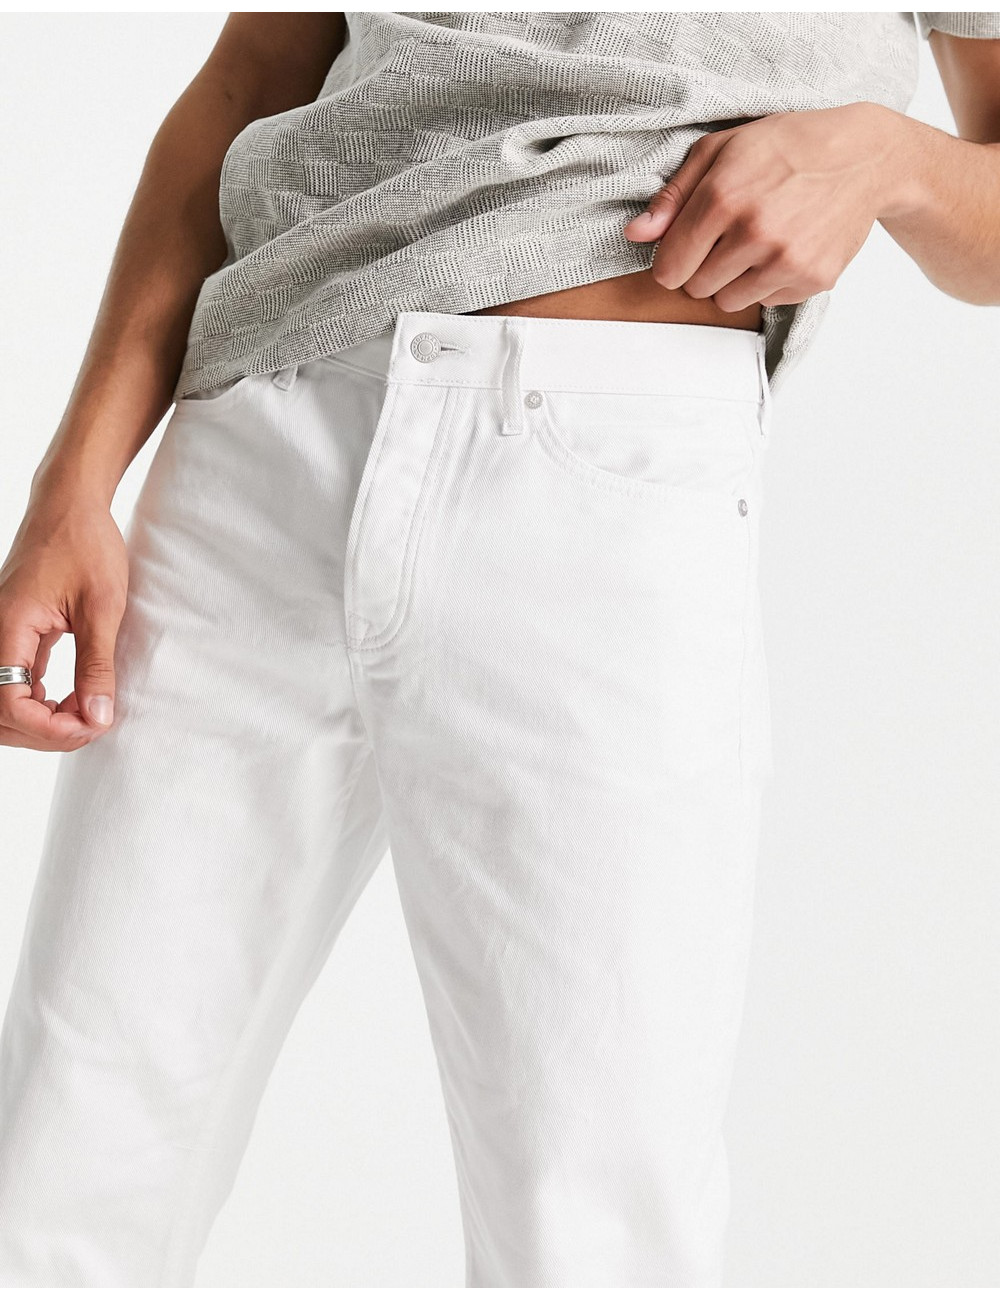 Topman relaxed jeans in white